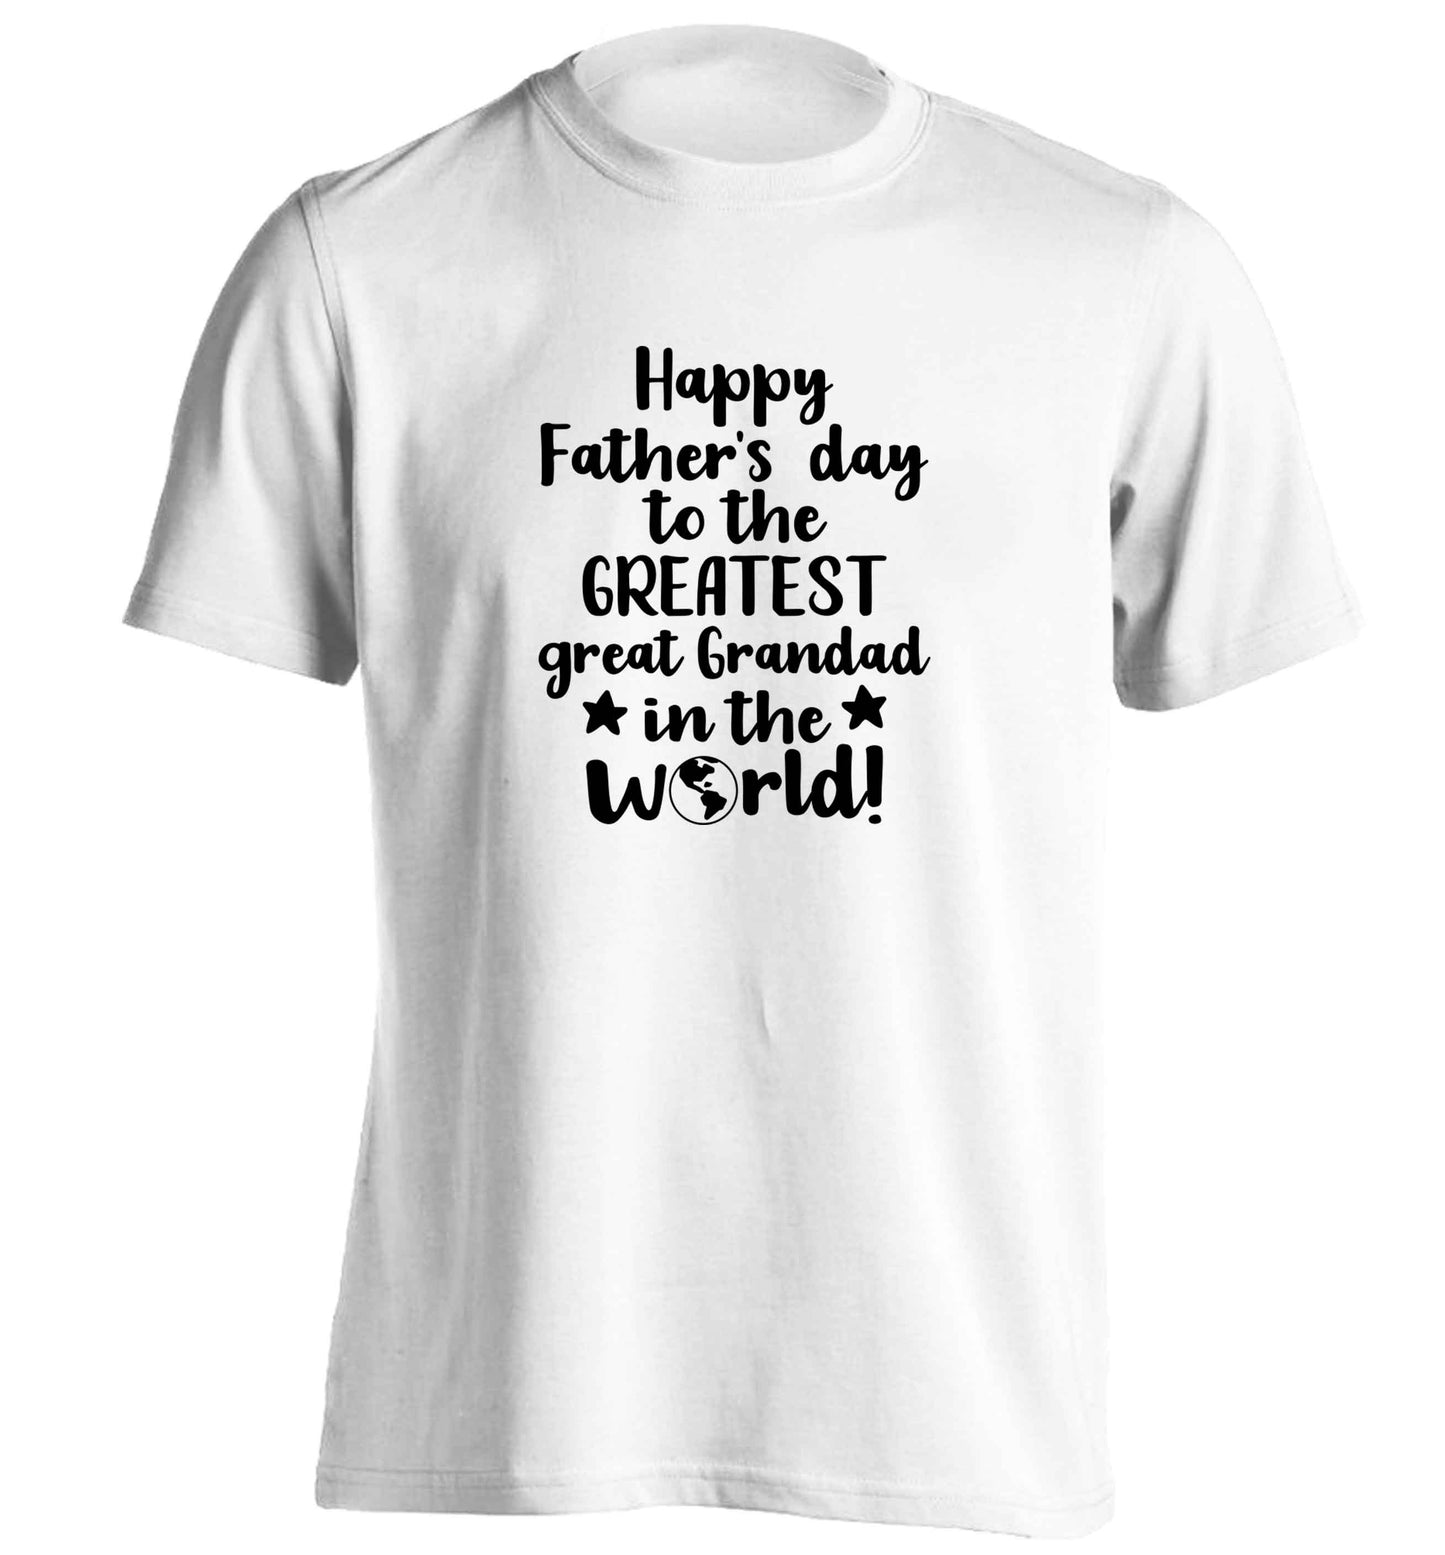 Happy Father's day to the greatest great grandad in the world adults unisex white Tshirt 2XL